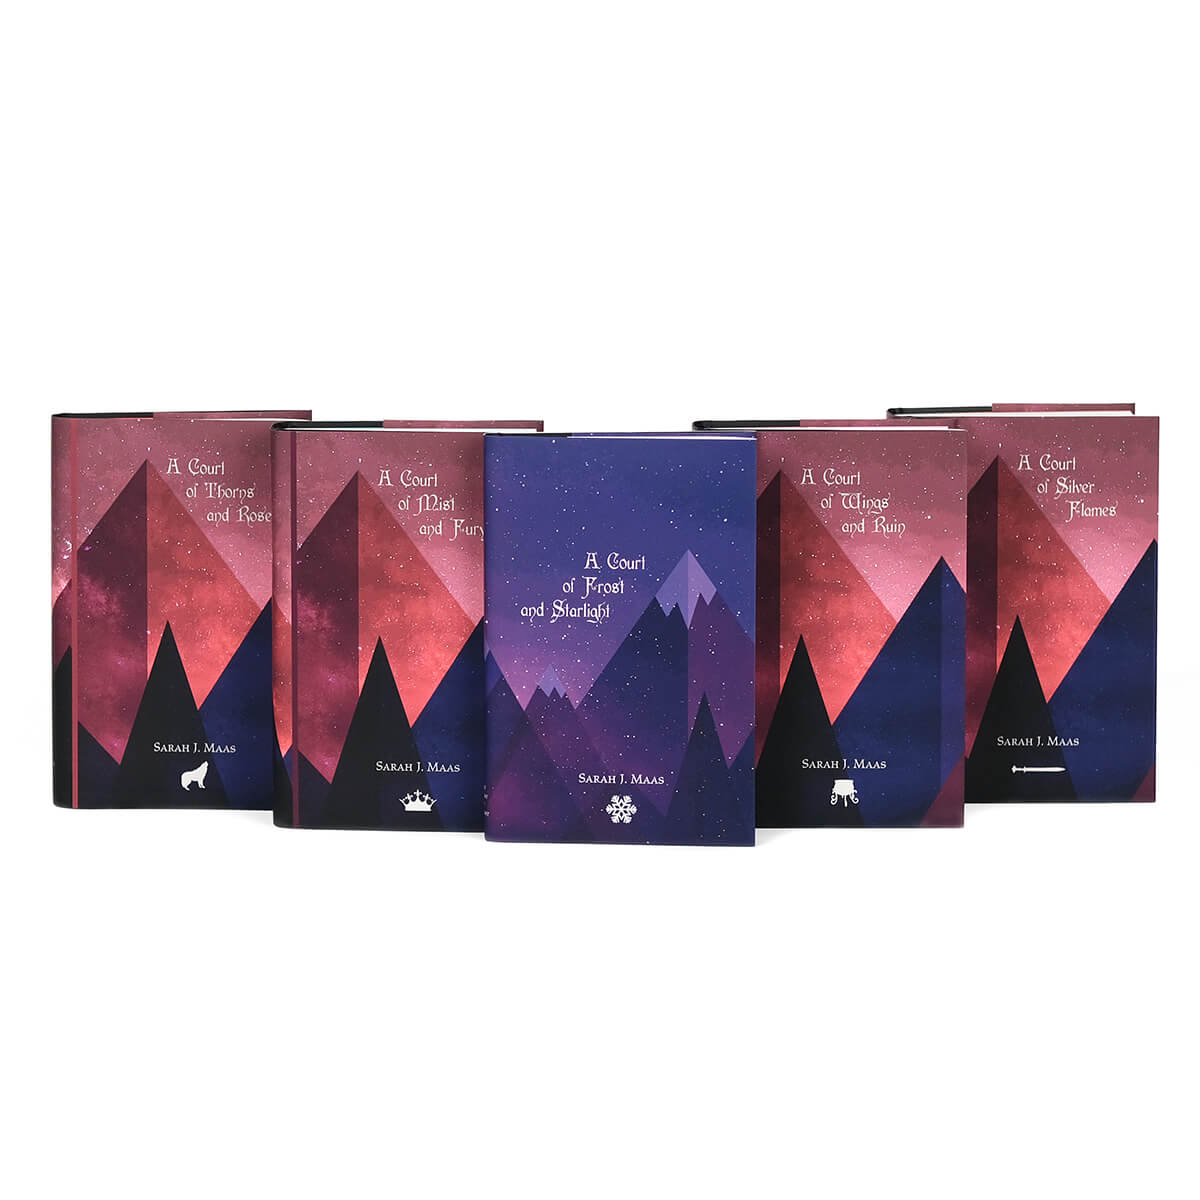 Front covers feature book title and authors name in white with pink and purple mountains beneath a starry sky in the background.